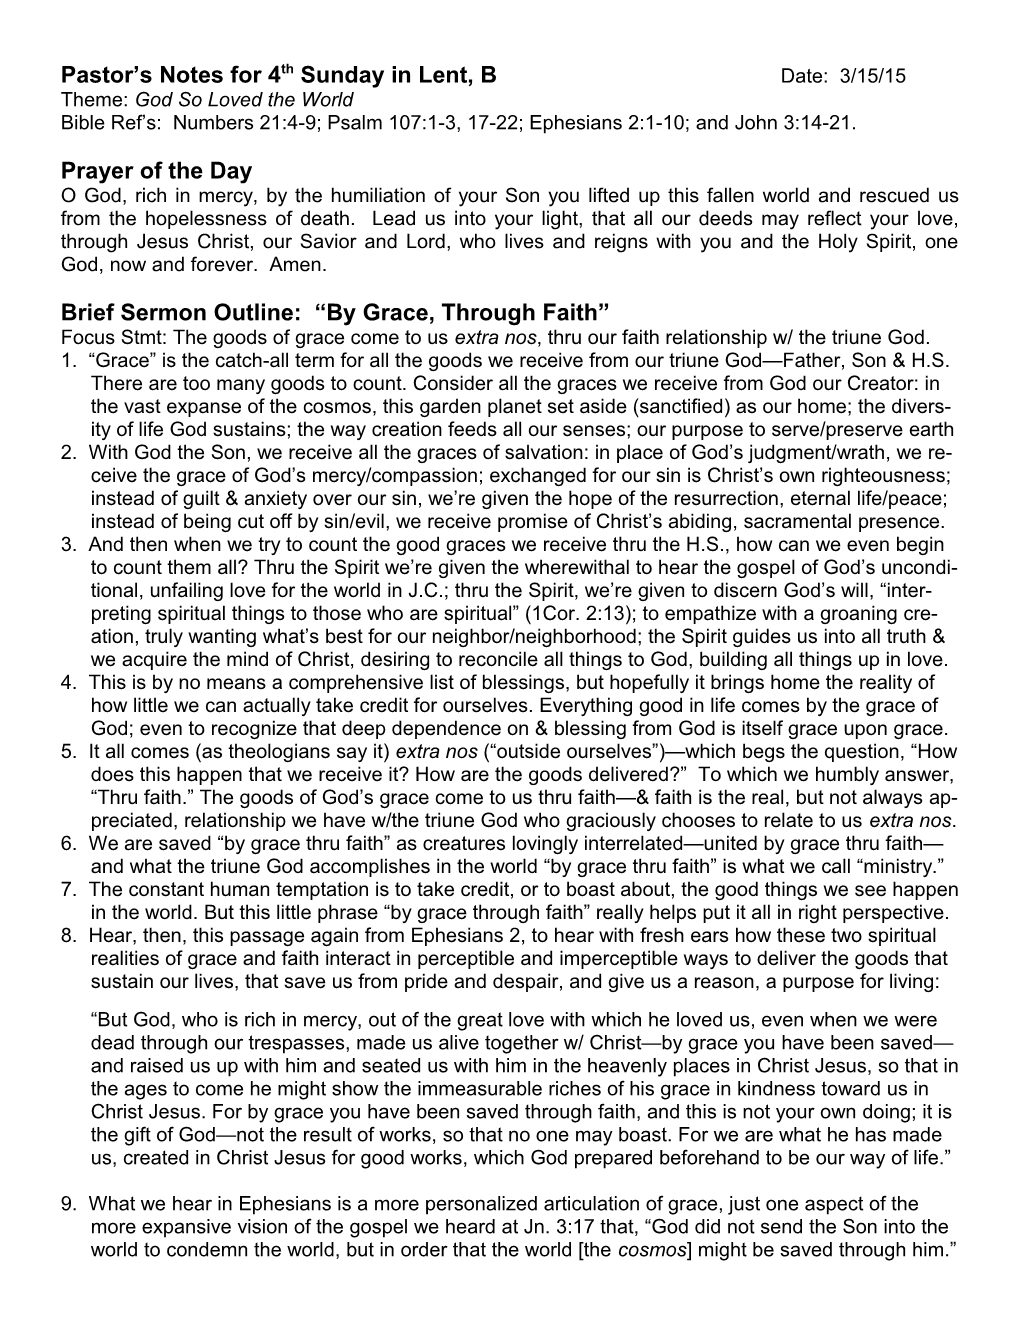 Pastor S Notes for 4Th Sunday in Lent, B Date: 3/15/15